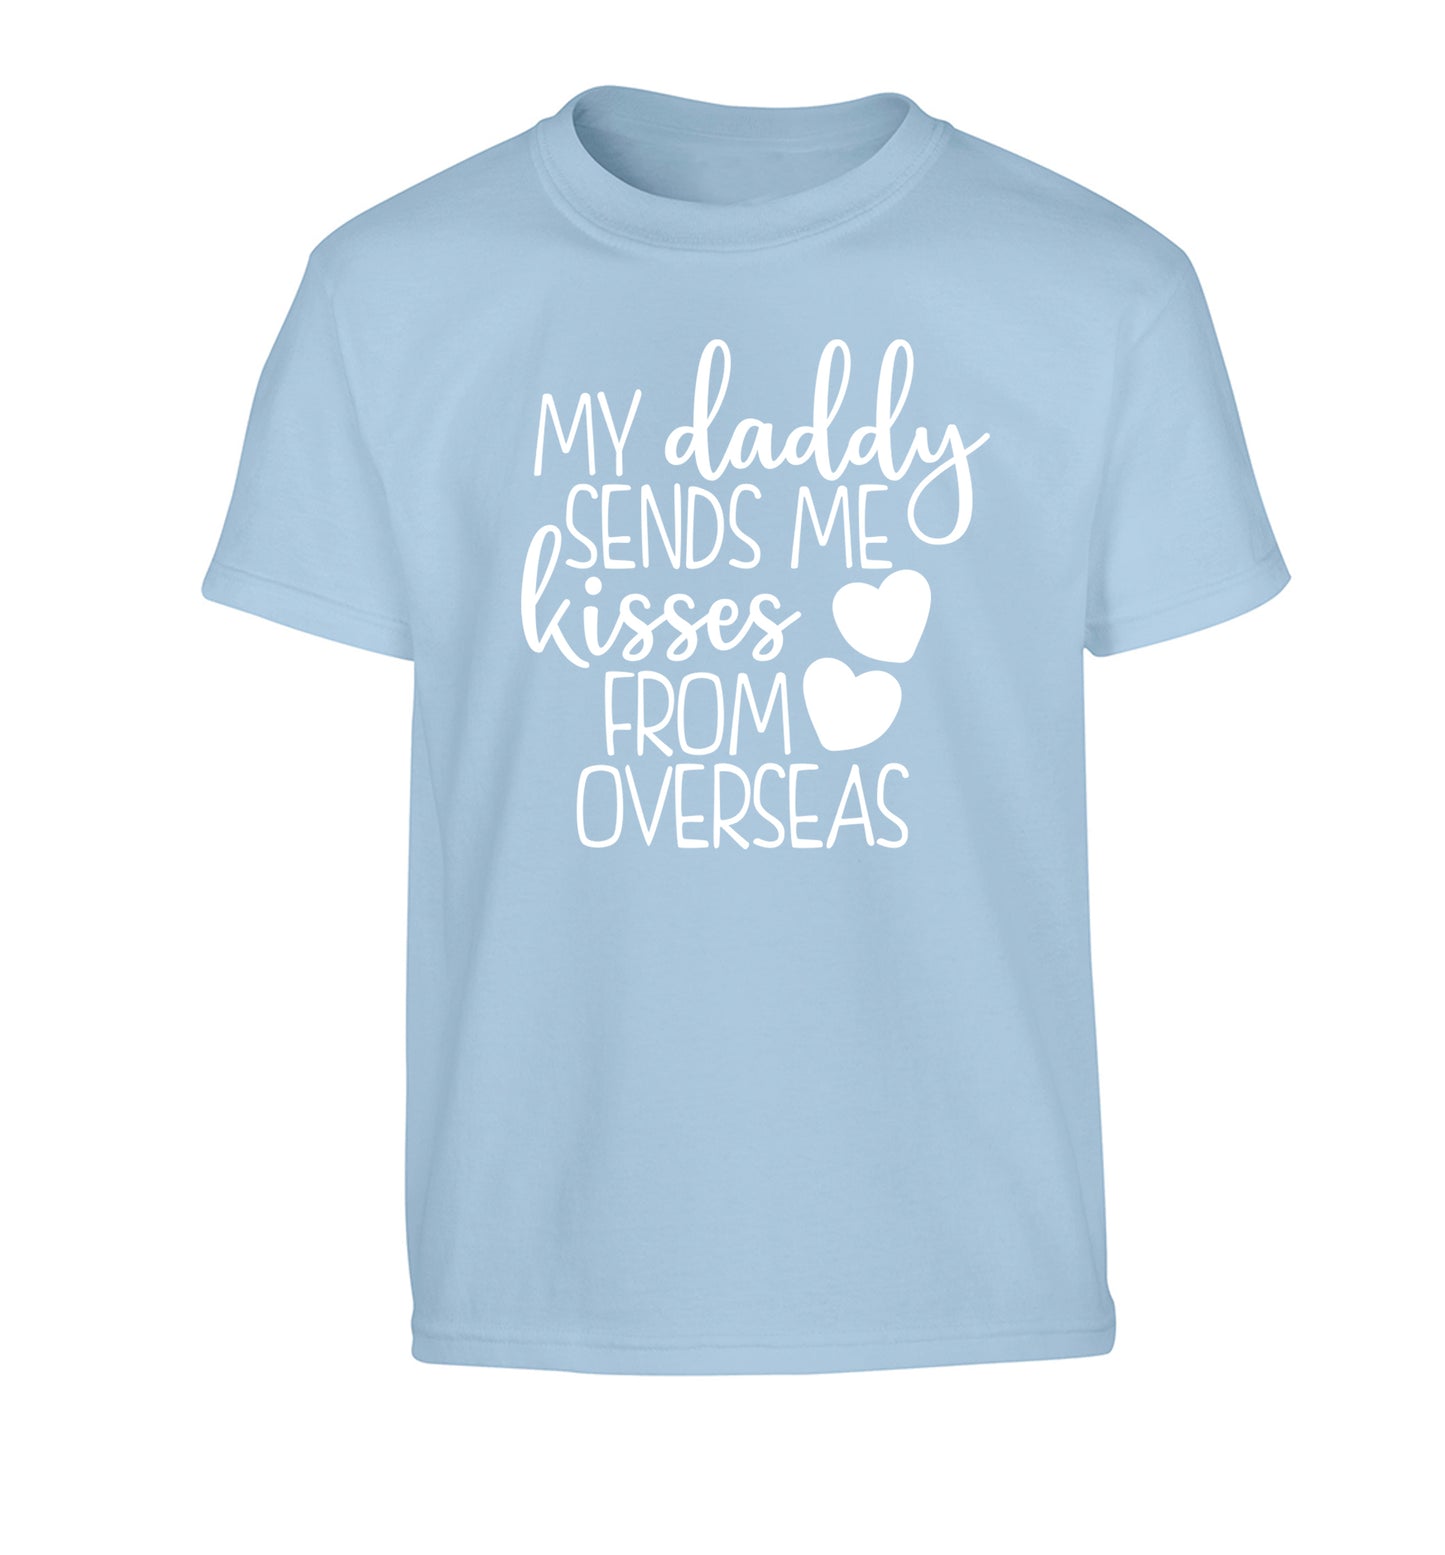 My daddy sends me kisses from overseas Children's light blue Tshirt 12-13 Years